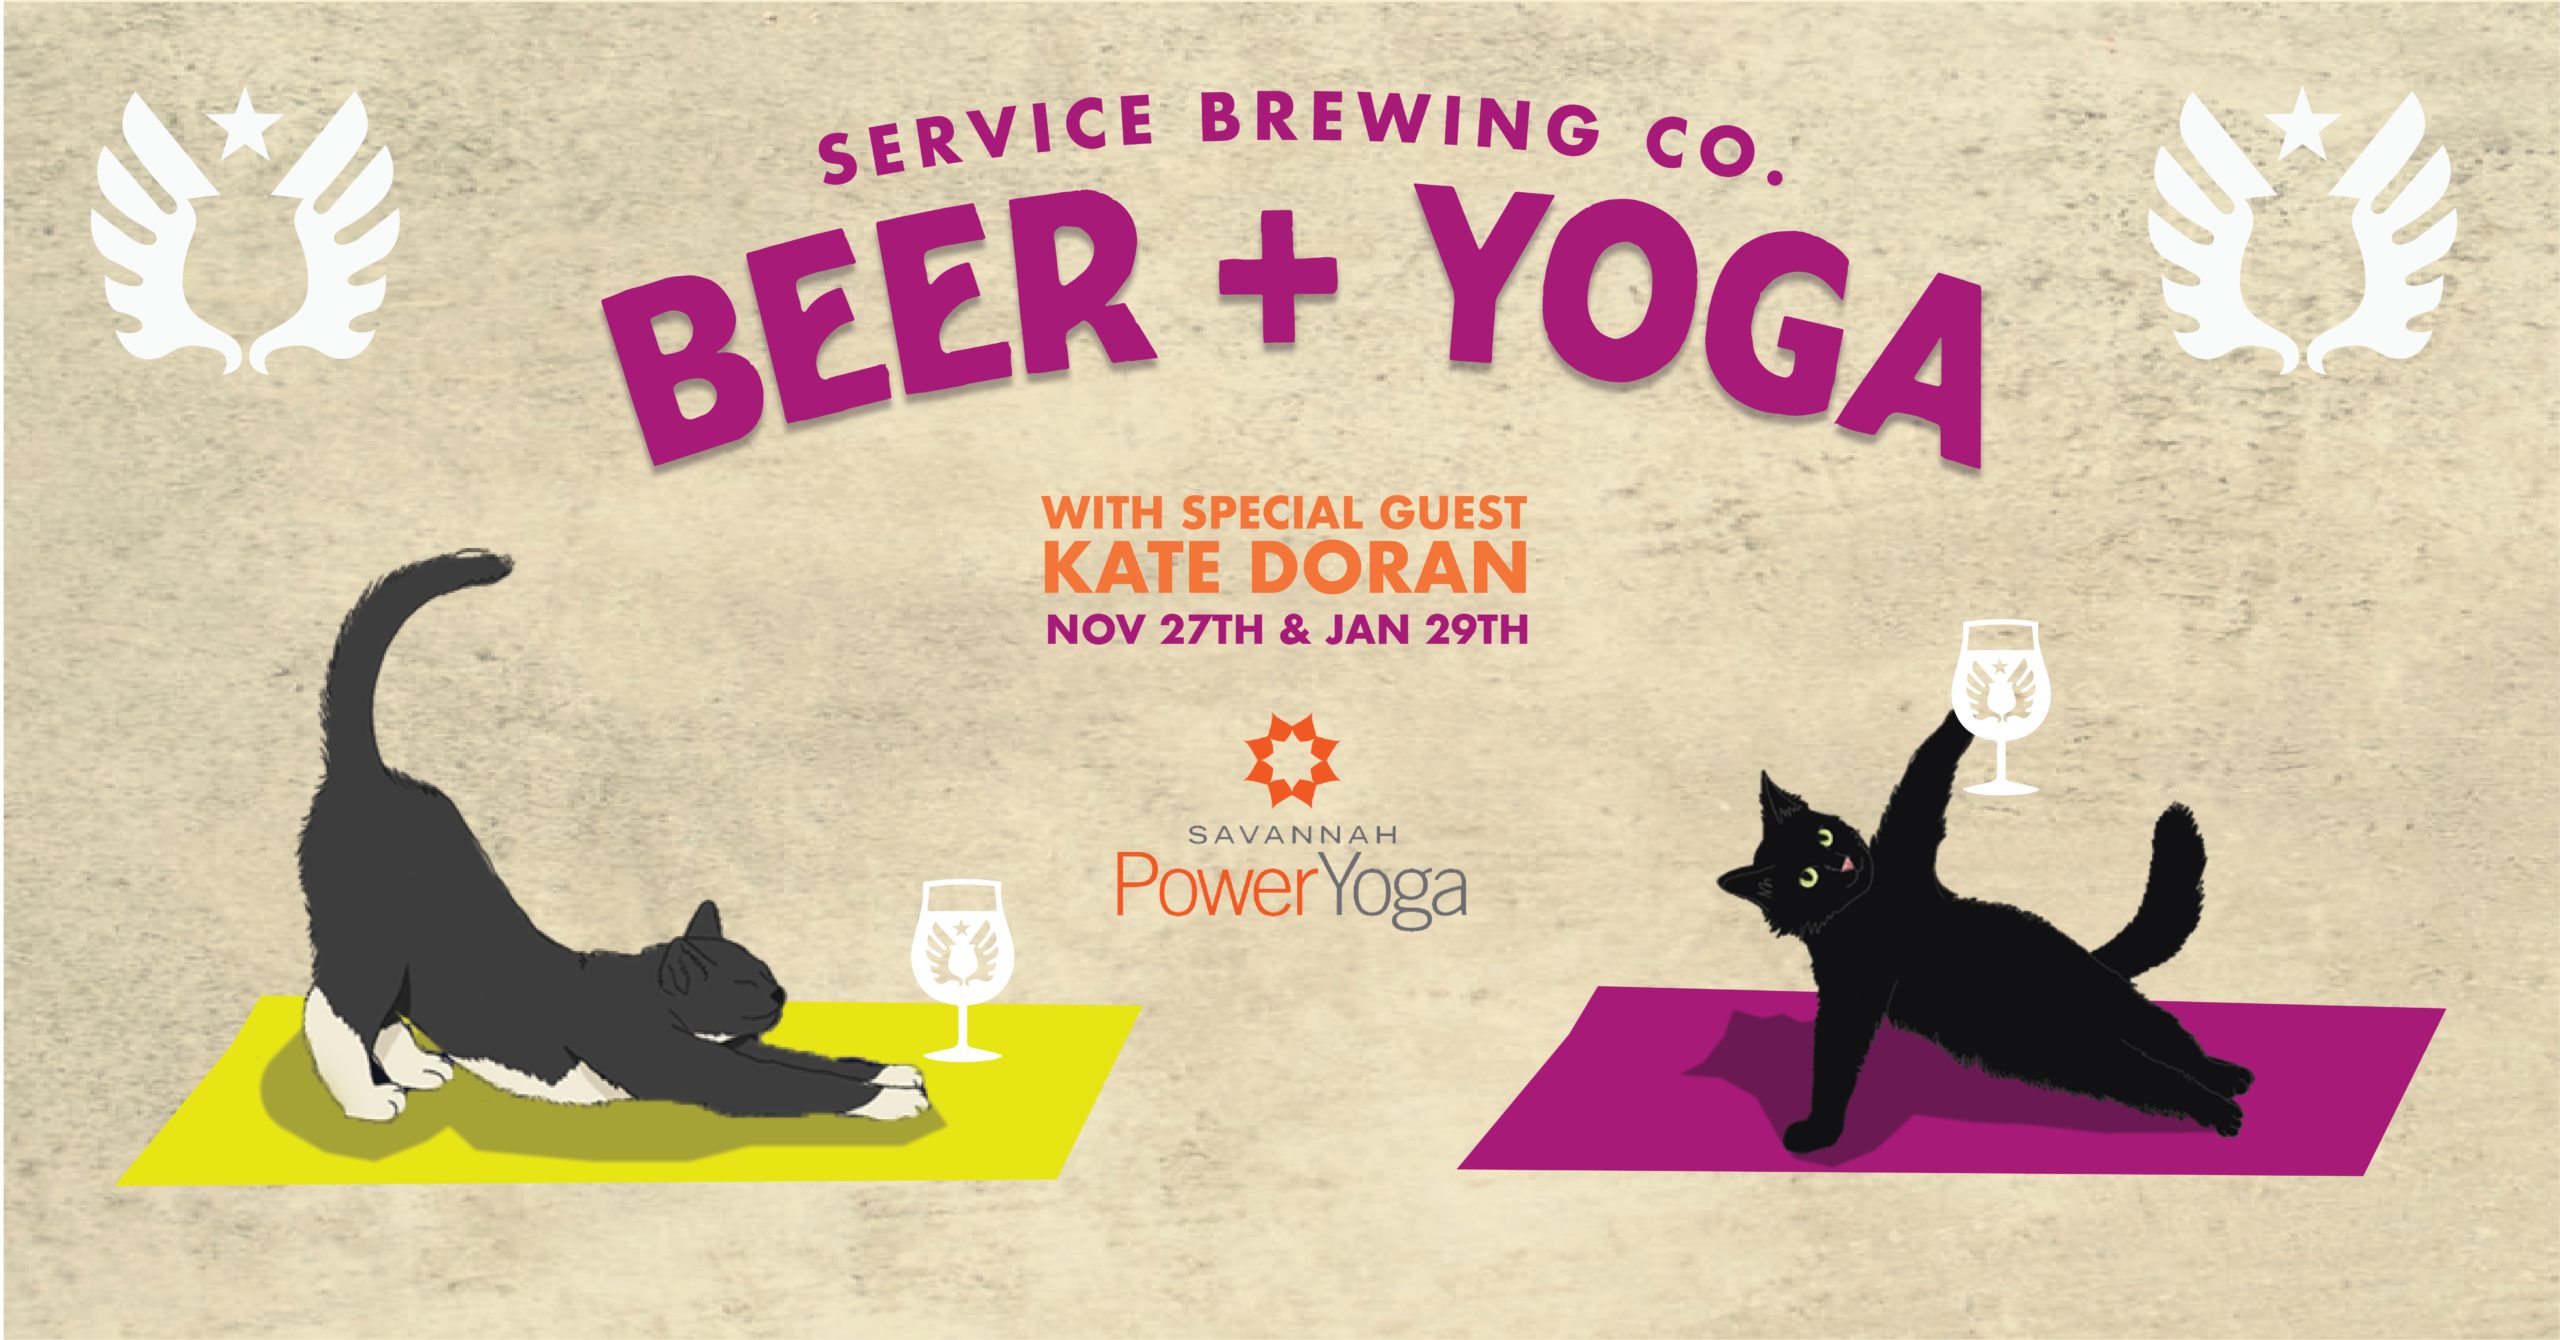 Service Brewing Beer & Yoga with Special Guest Kate Doran